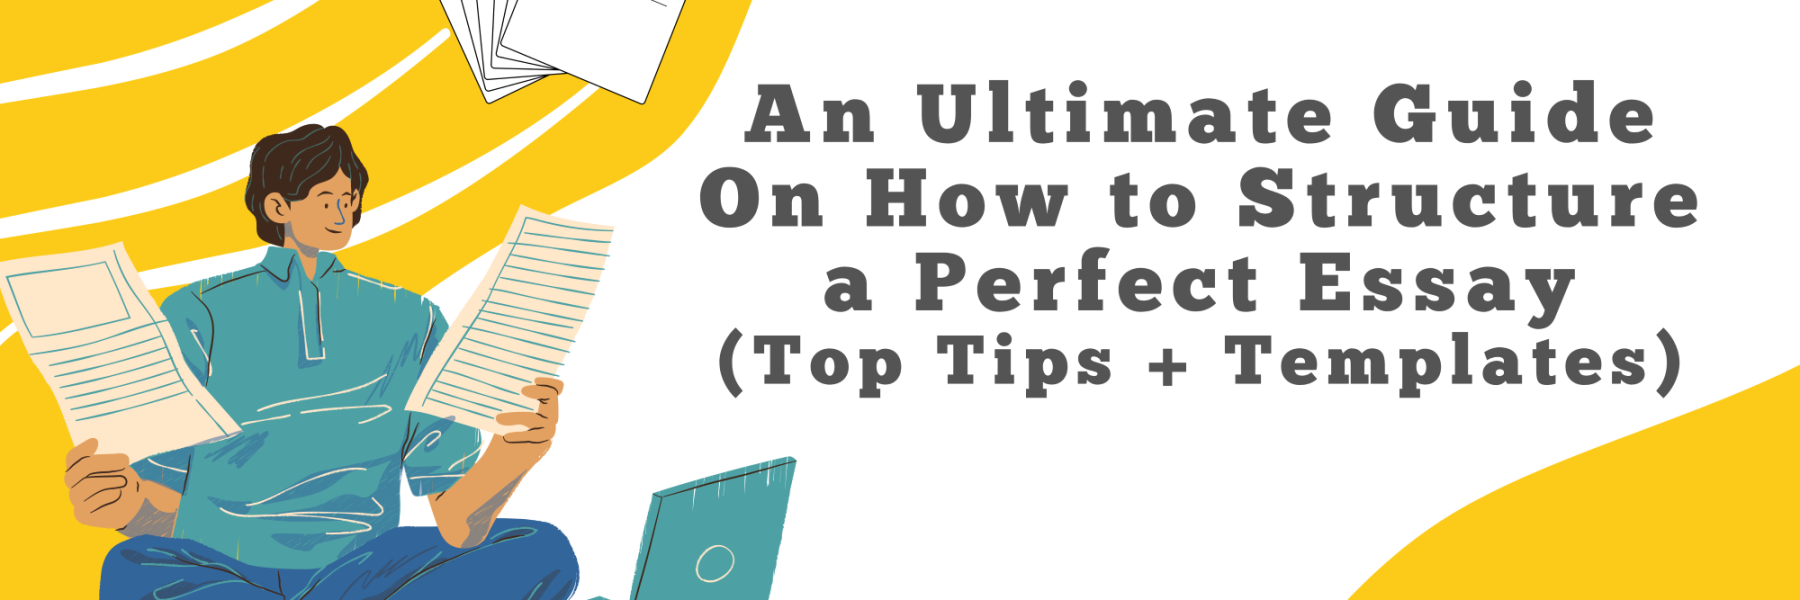 An Ultimate Guide On How to Structure a Perfect Essay (Top Tips + Templates)